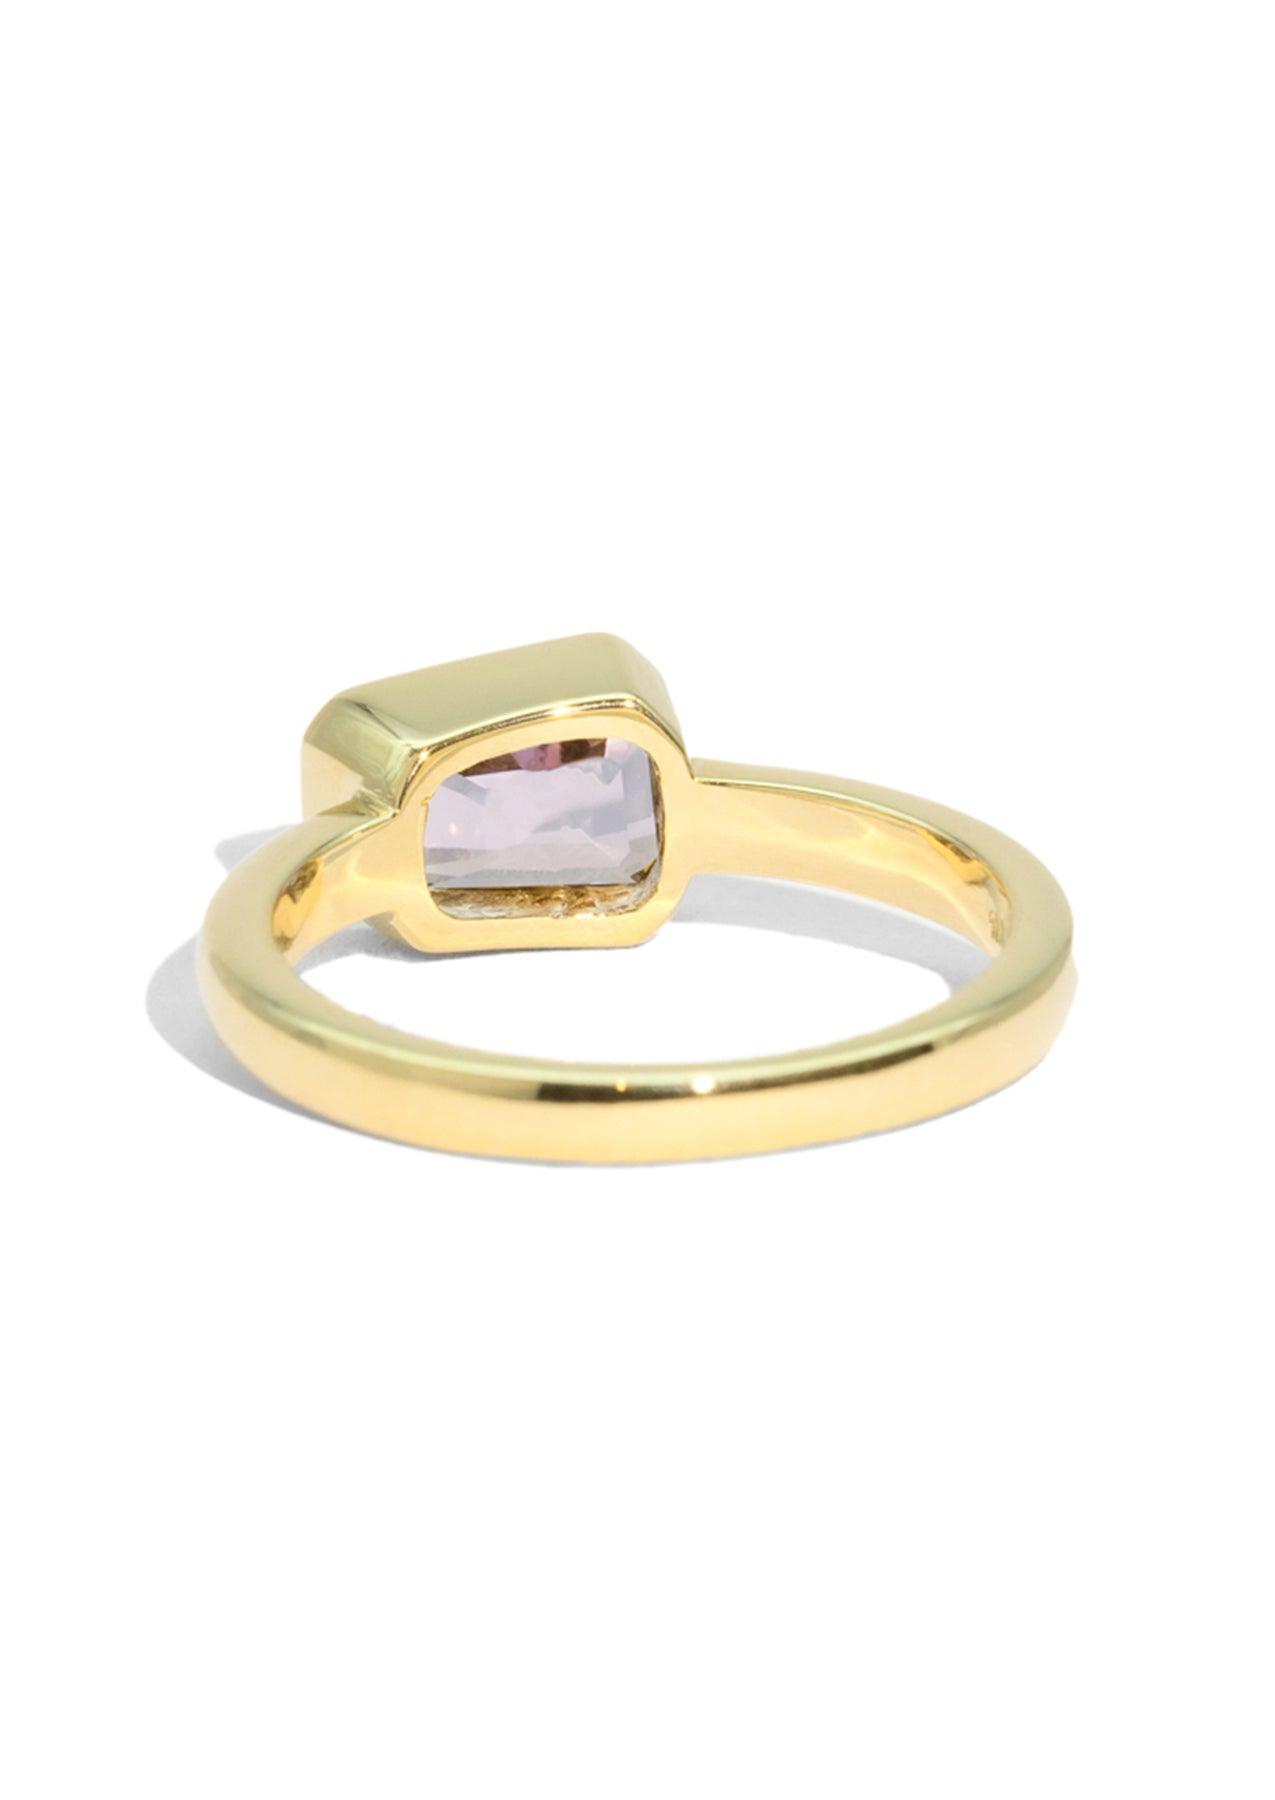 The Isabel 1.8ct Spinel Ring